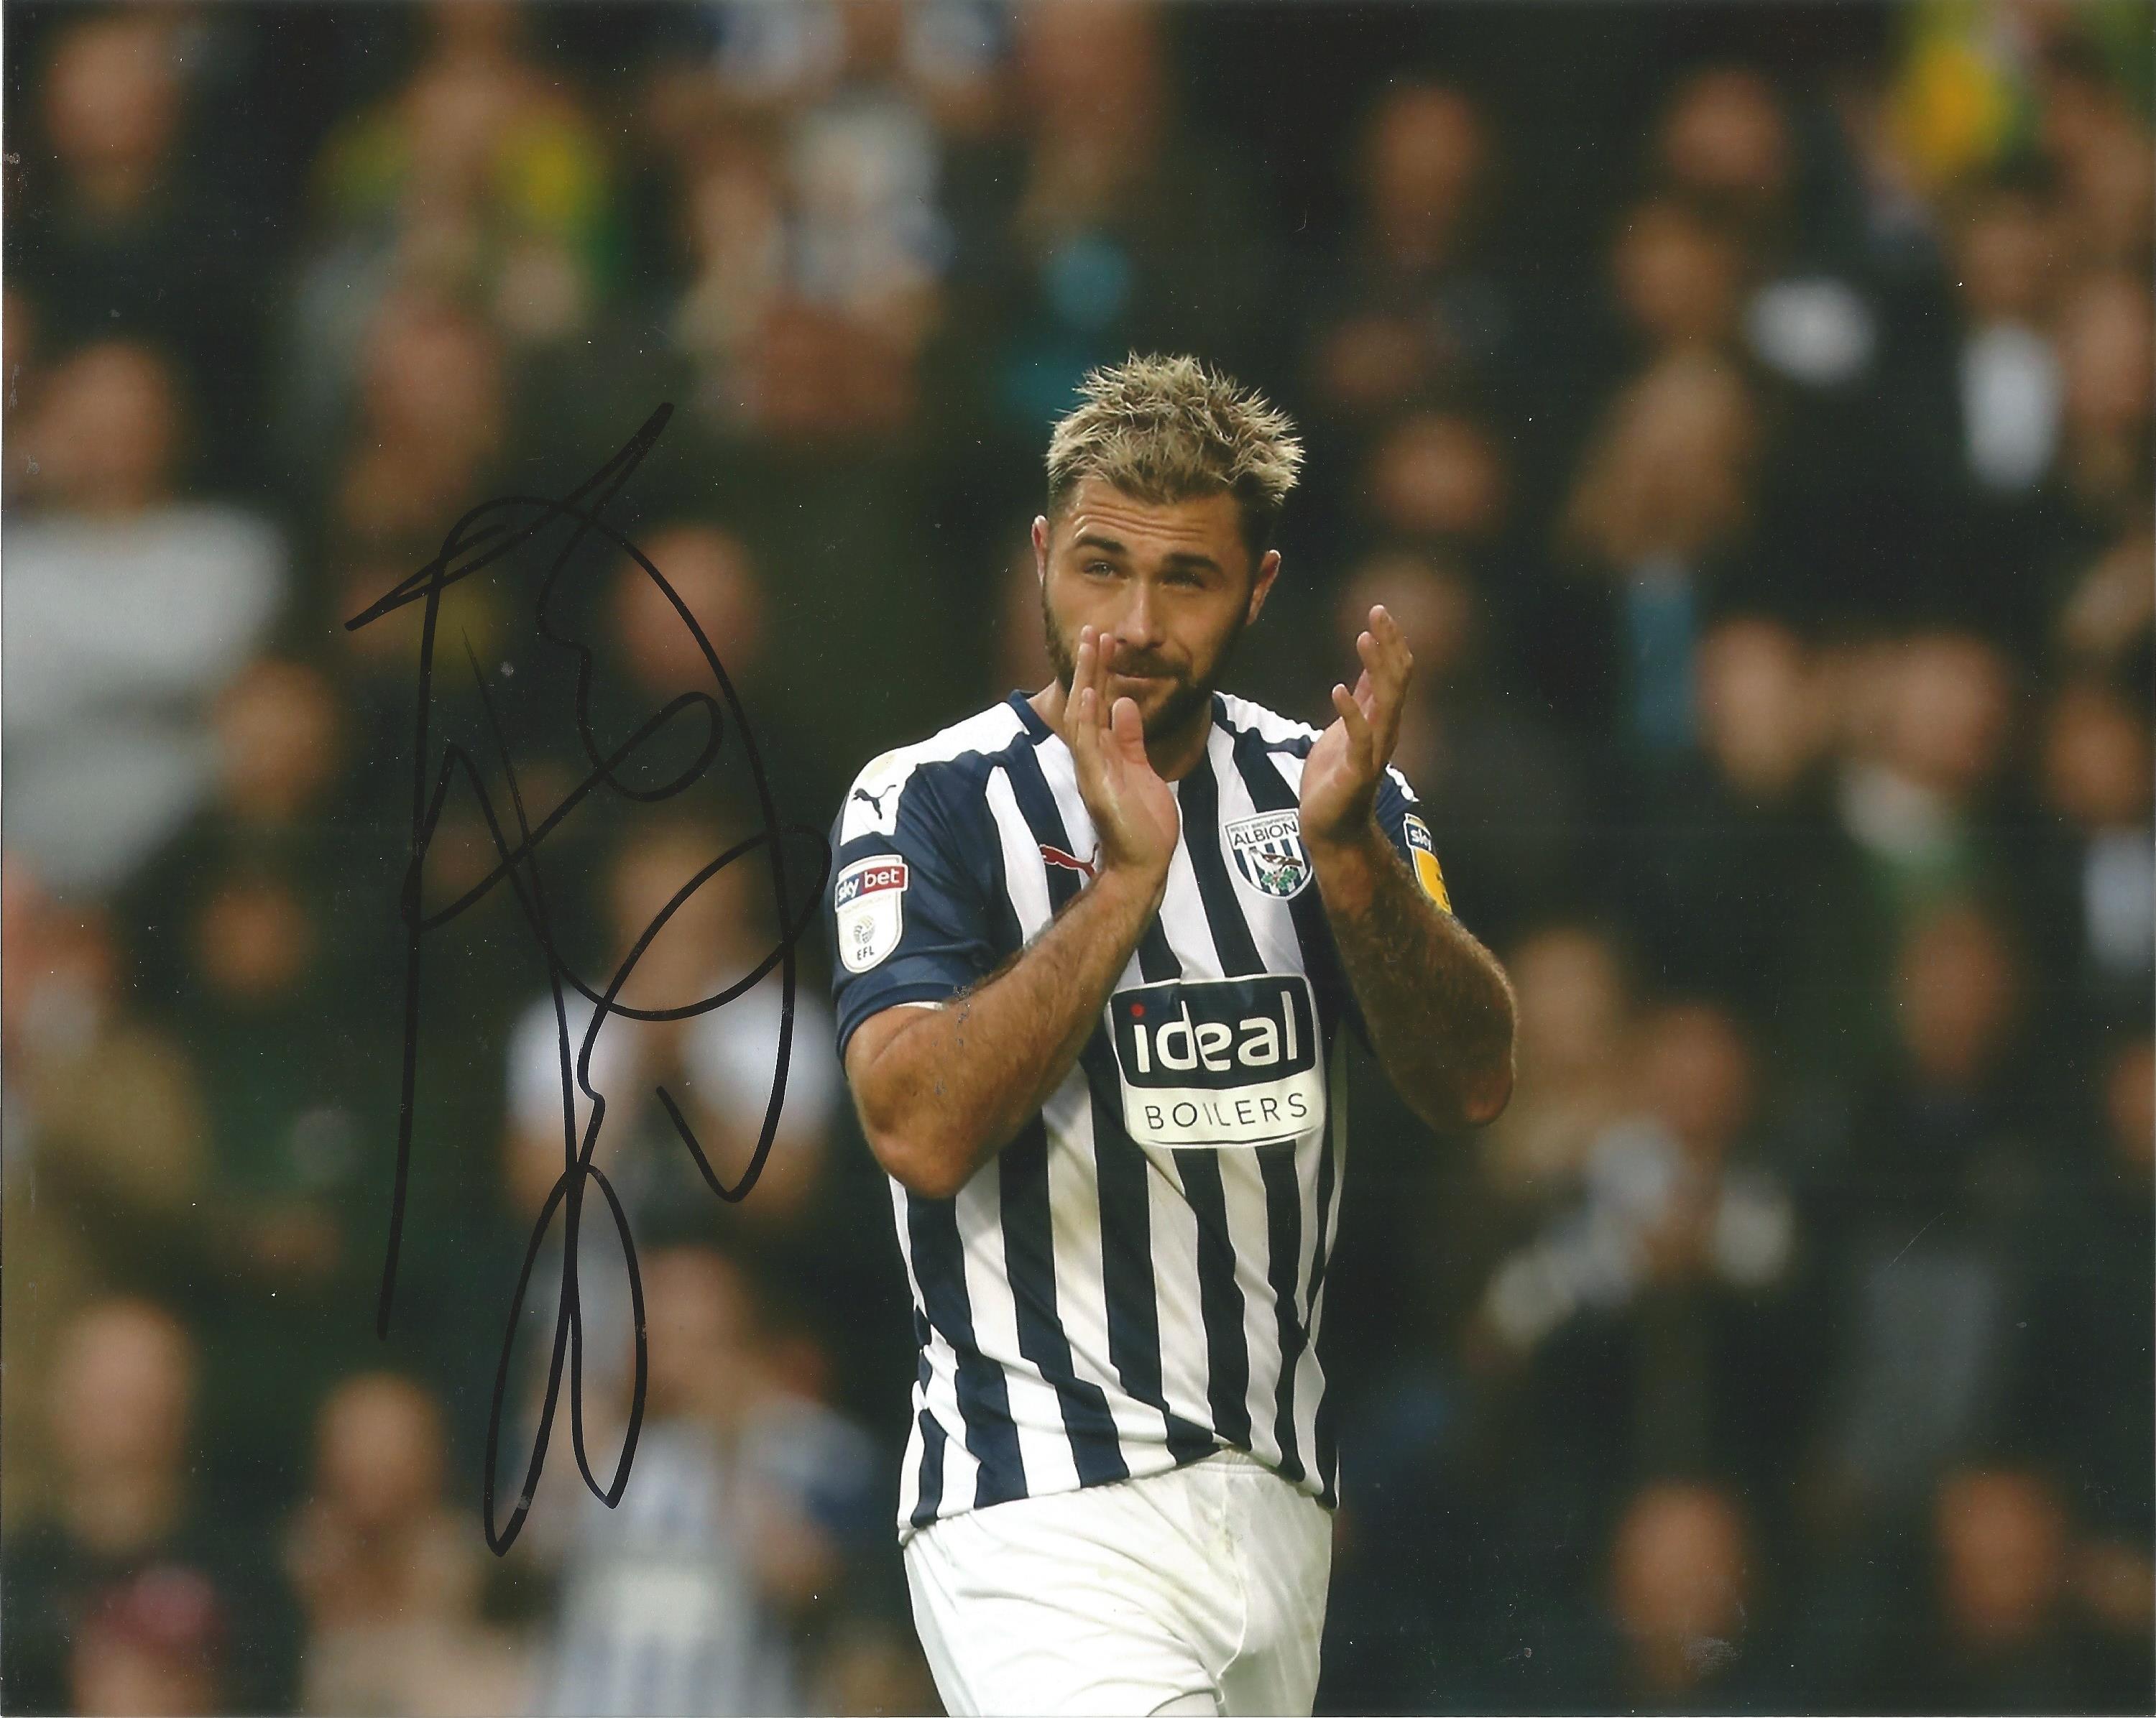 CHARLIE AUSTIN signed West Bromwich Albion 8x10 Photo. Good Condition. All autographs are genuine